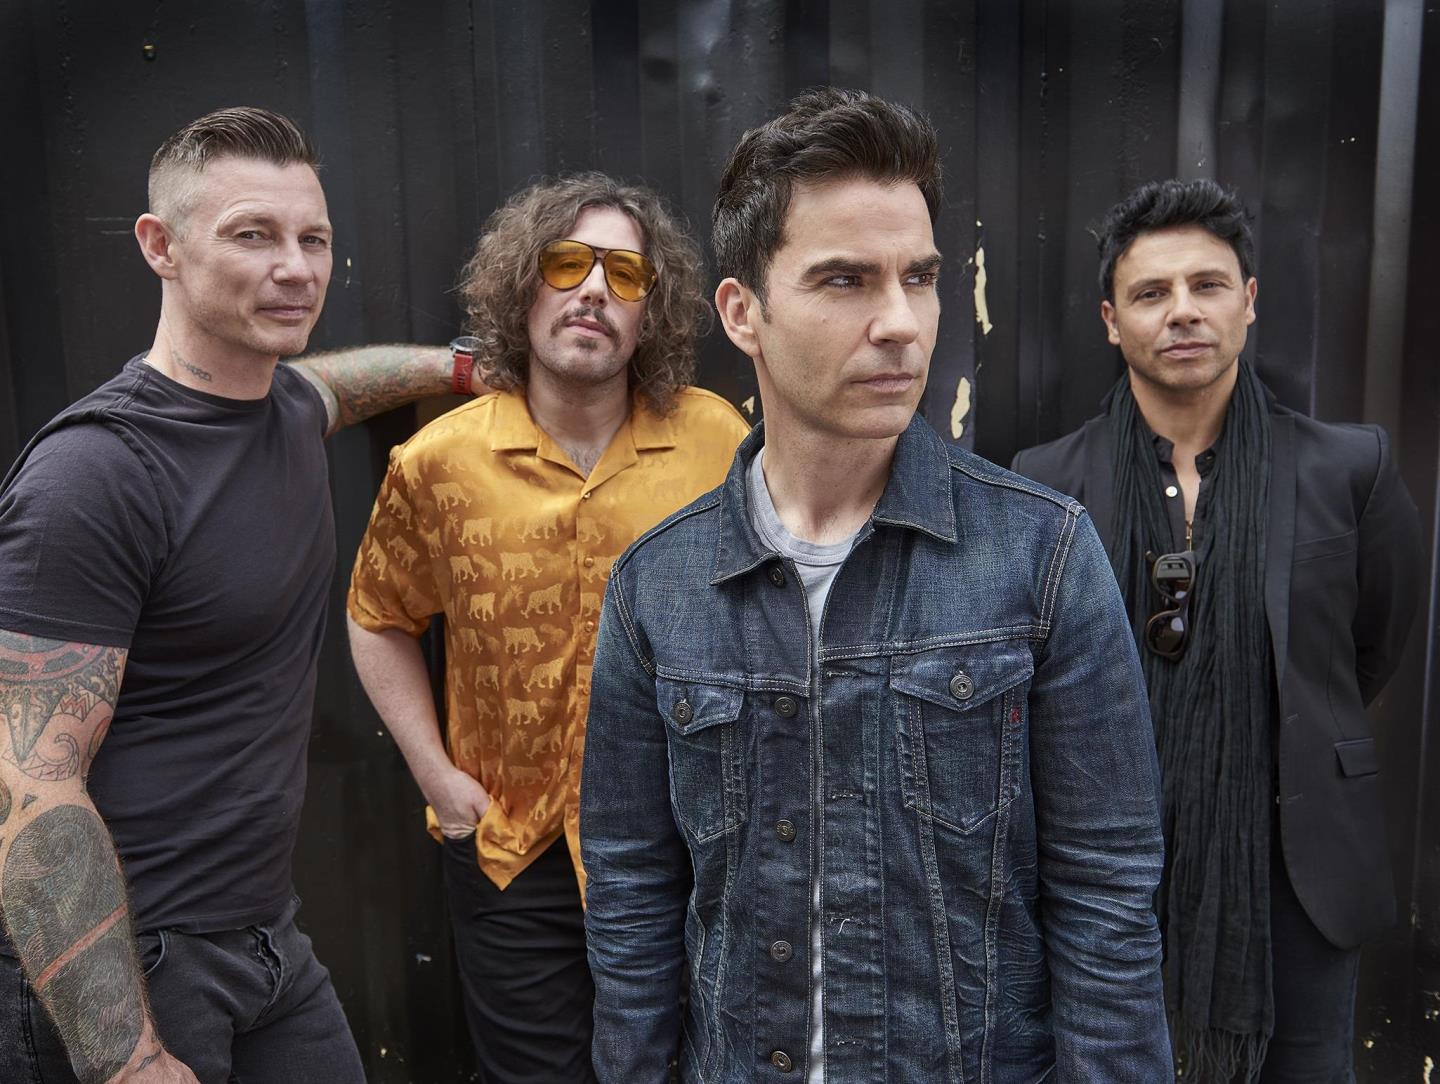 Group photo of Stereophonics